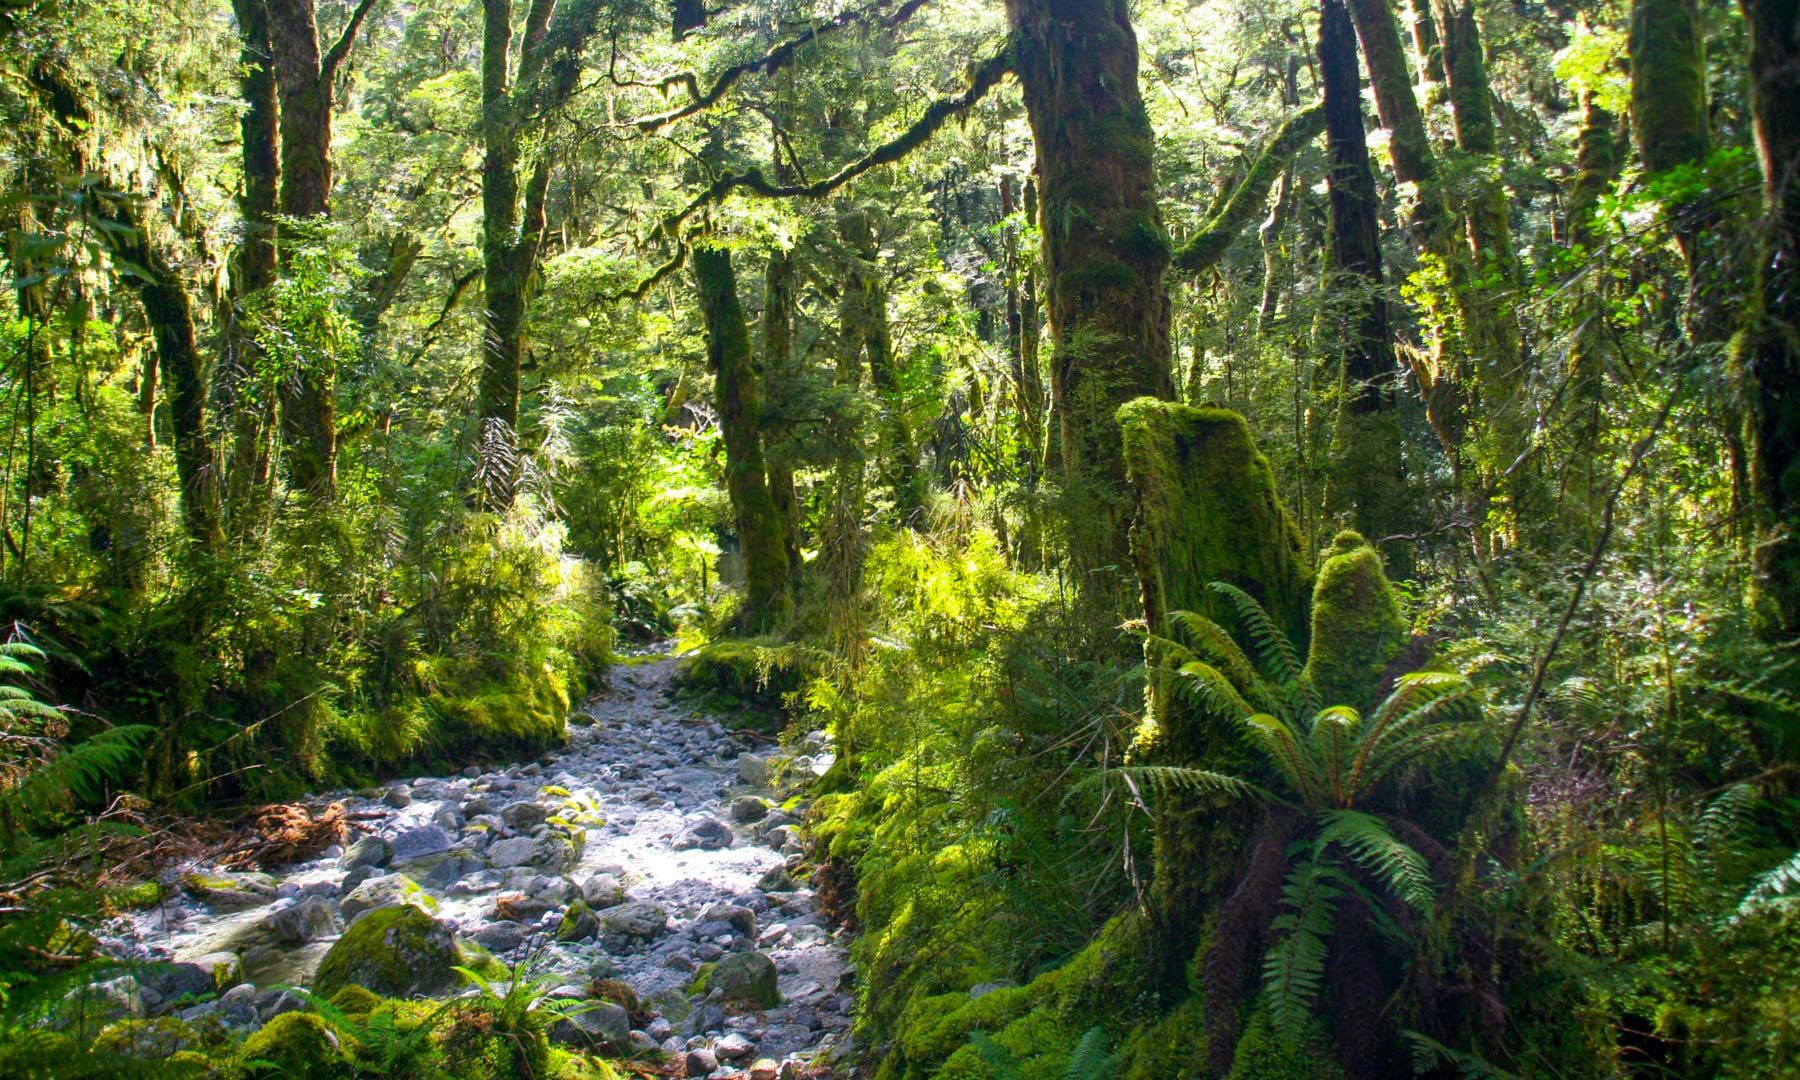 Guide to the Milford Track Great Walk in New Zealand